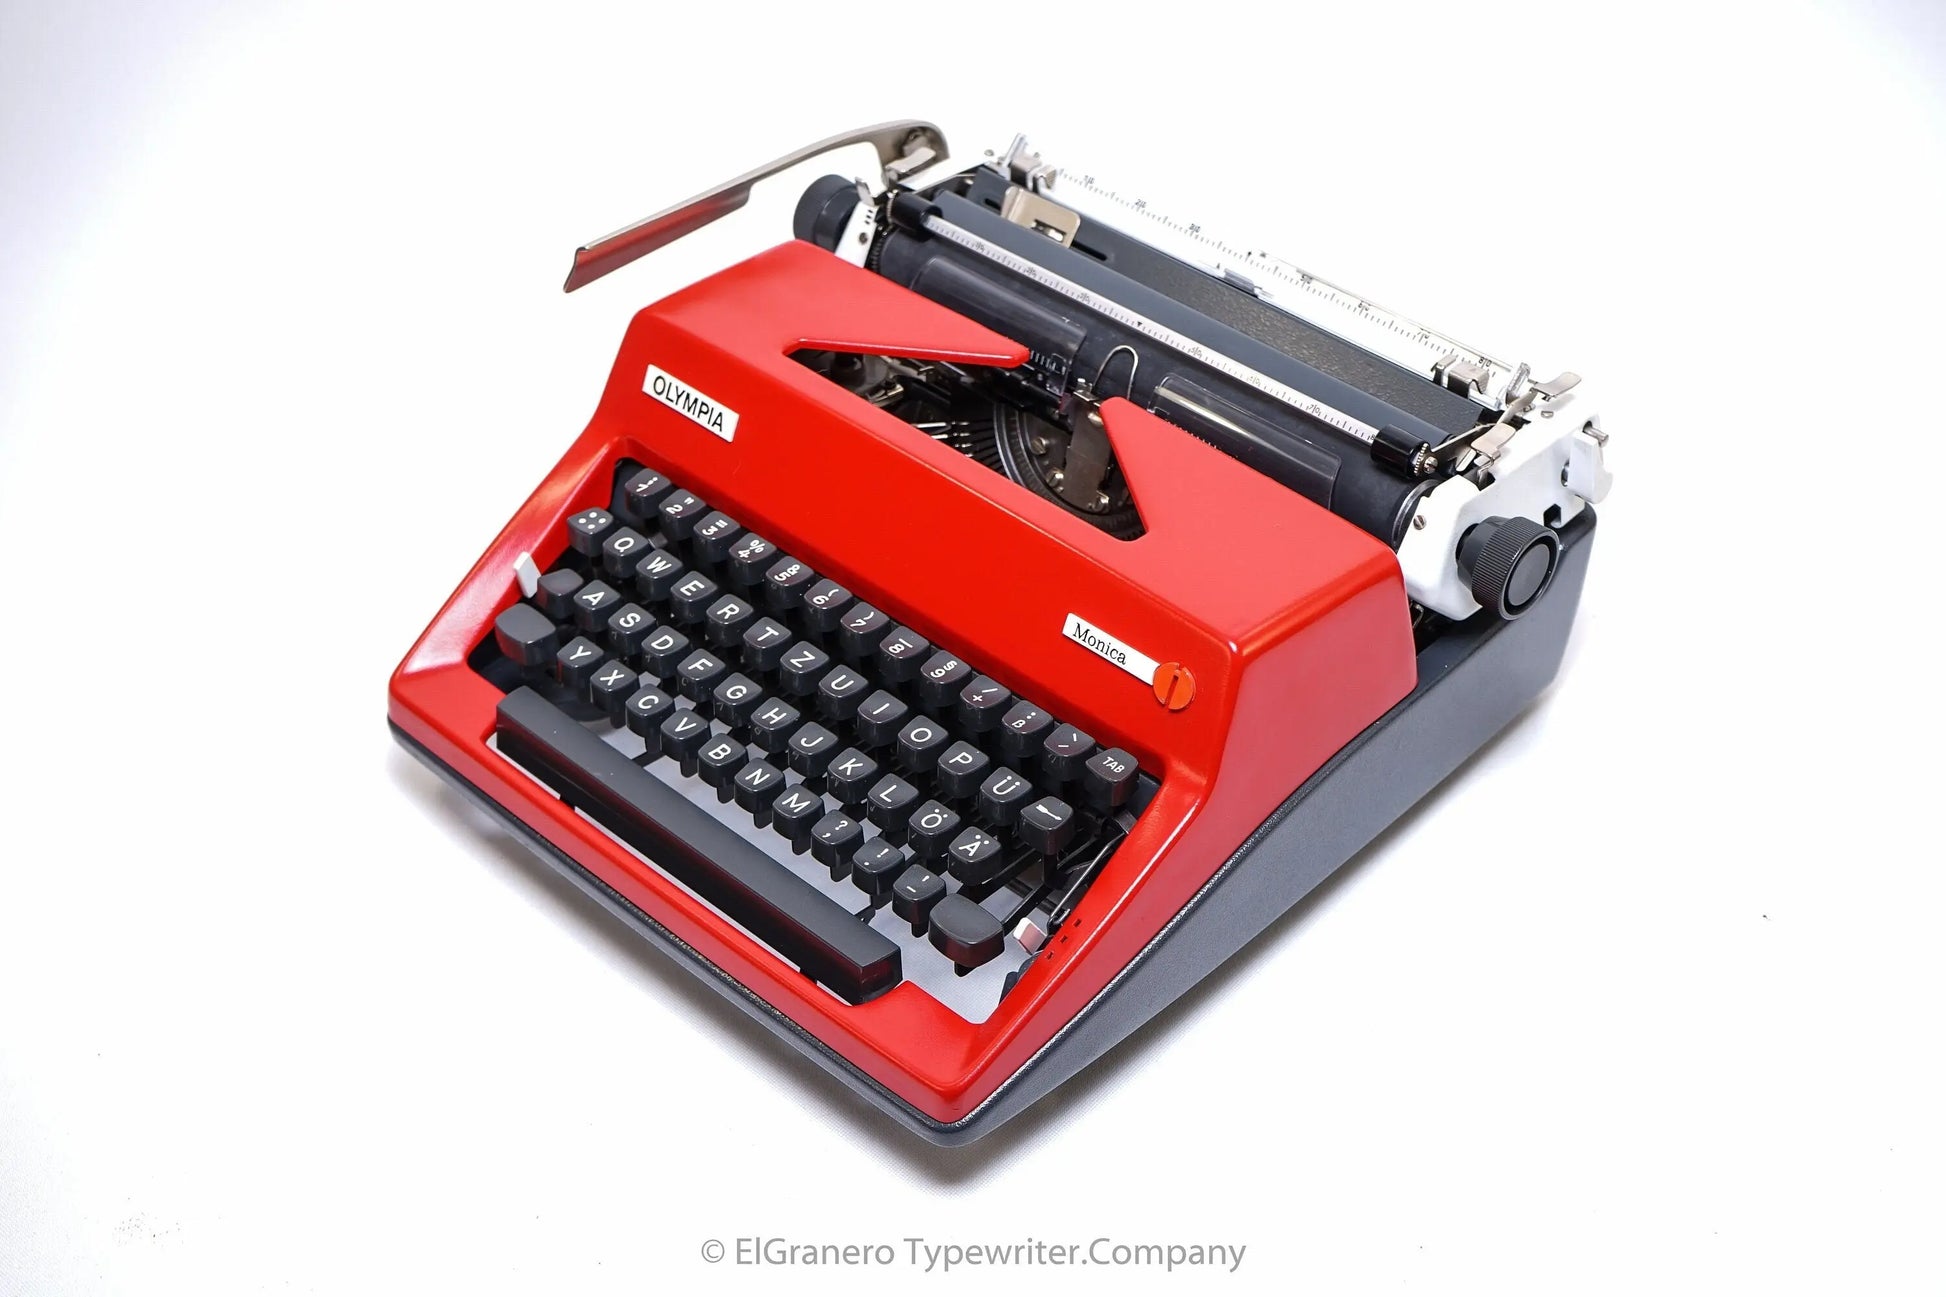 Olympia SM9 Red Typewriter, Vintage, Mint Condition, Manual Portable, Professionally Serviced by Typewriter.Company - ElGranero Typewriter.Company